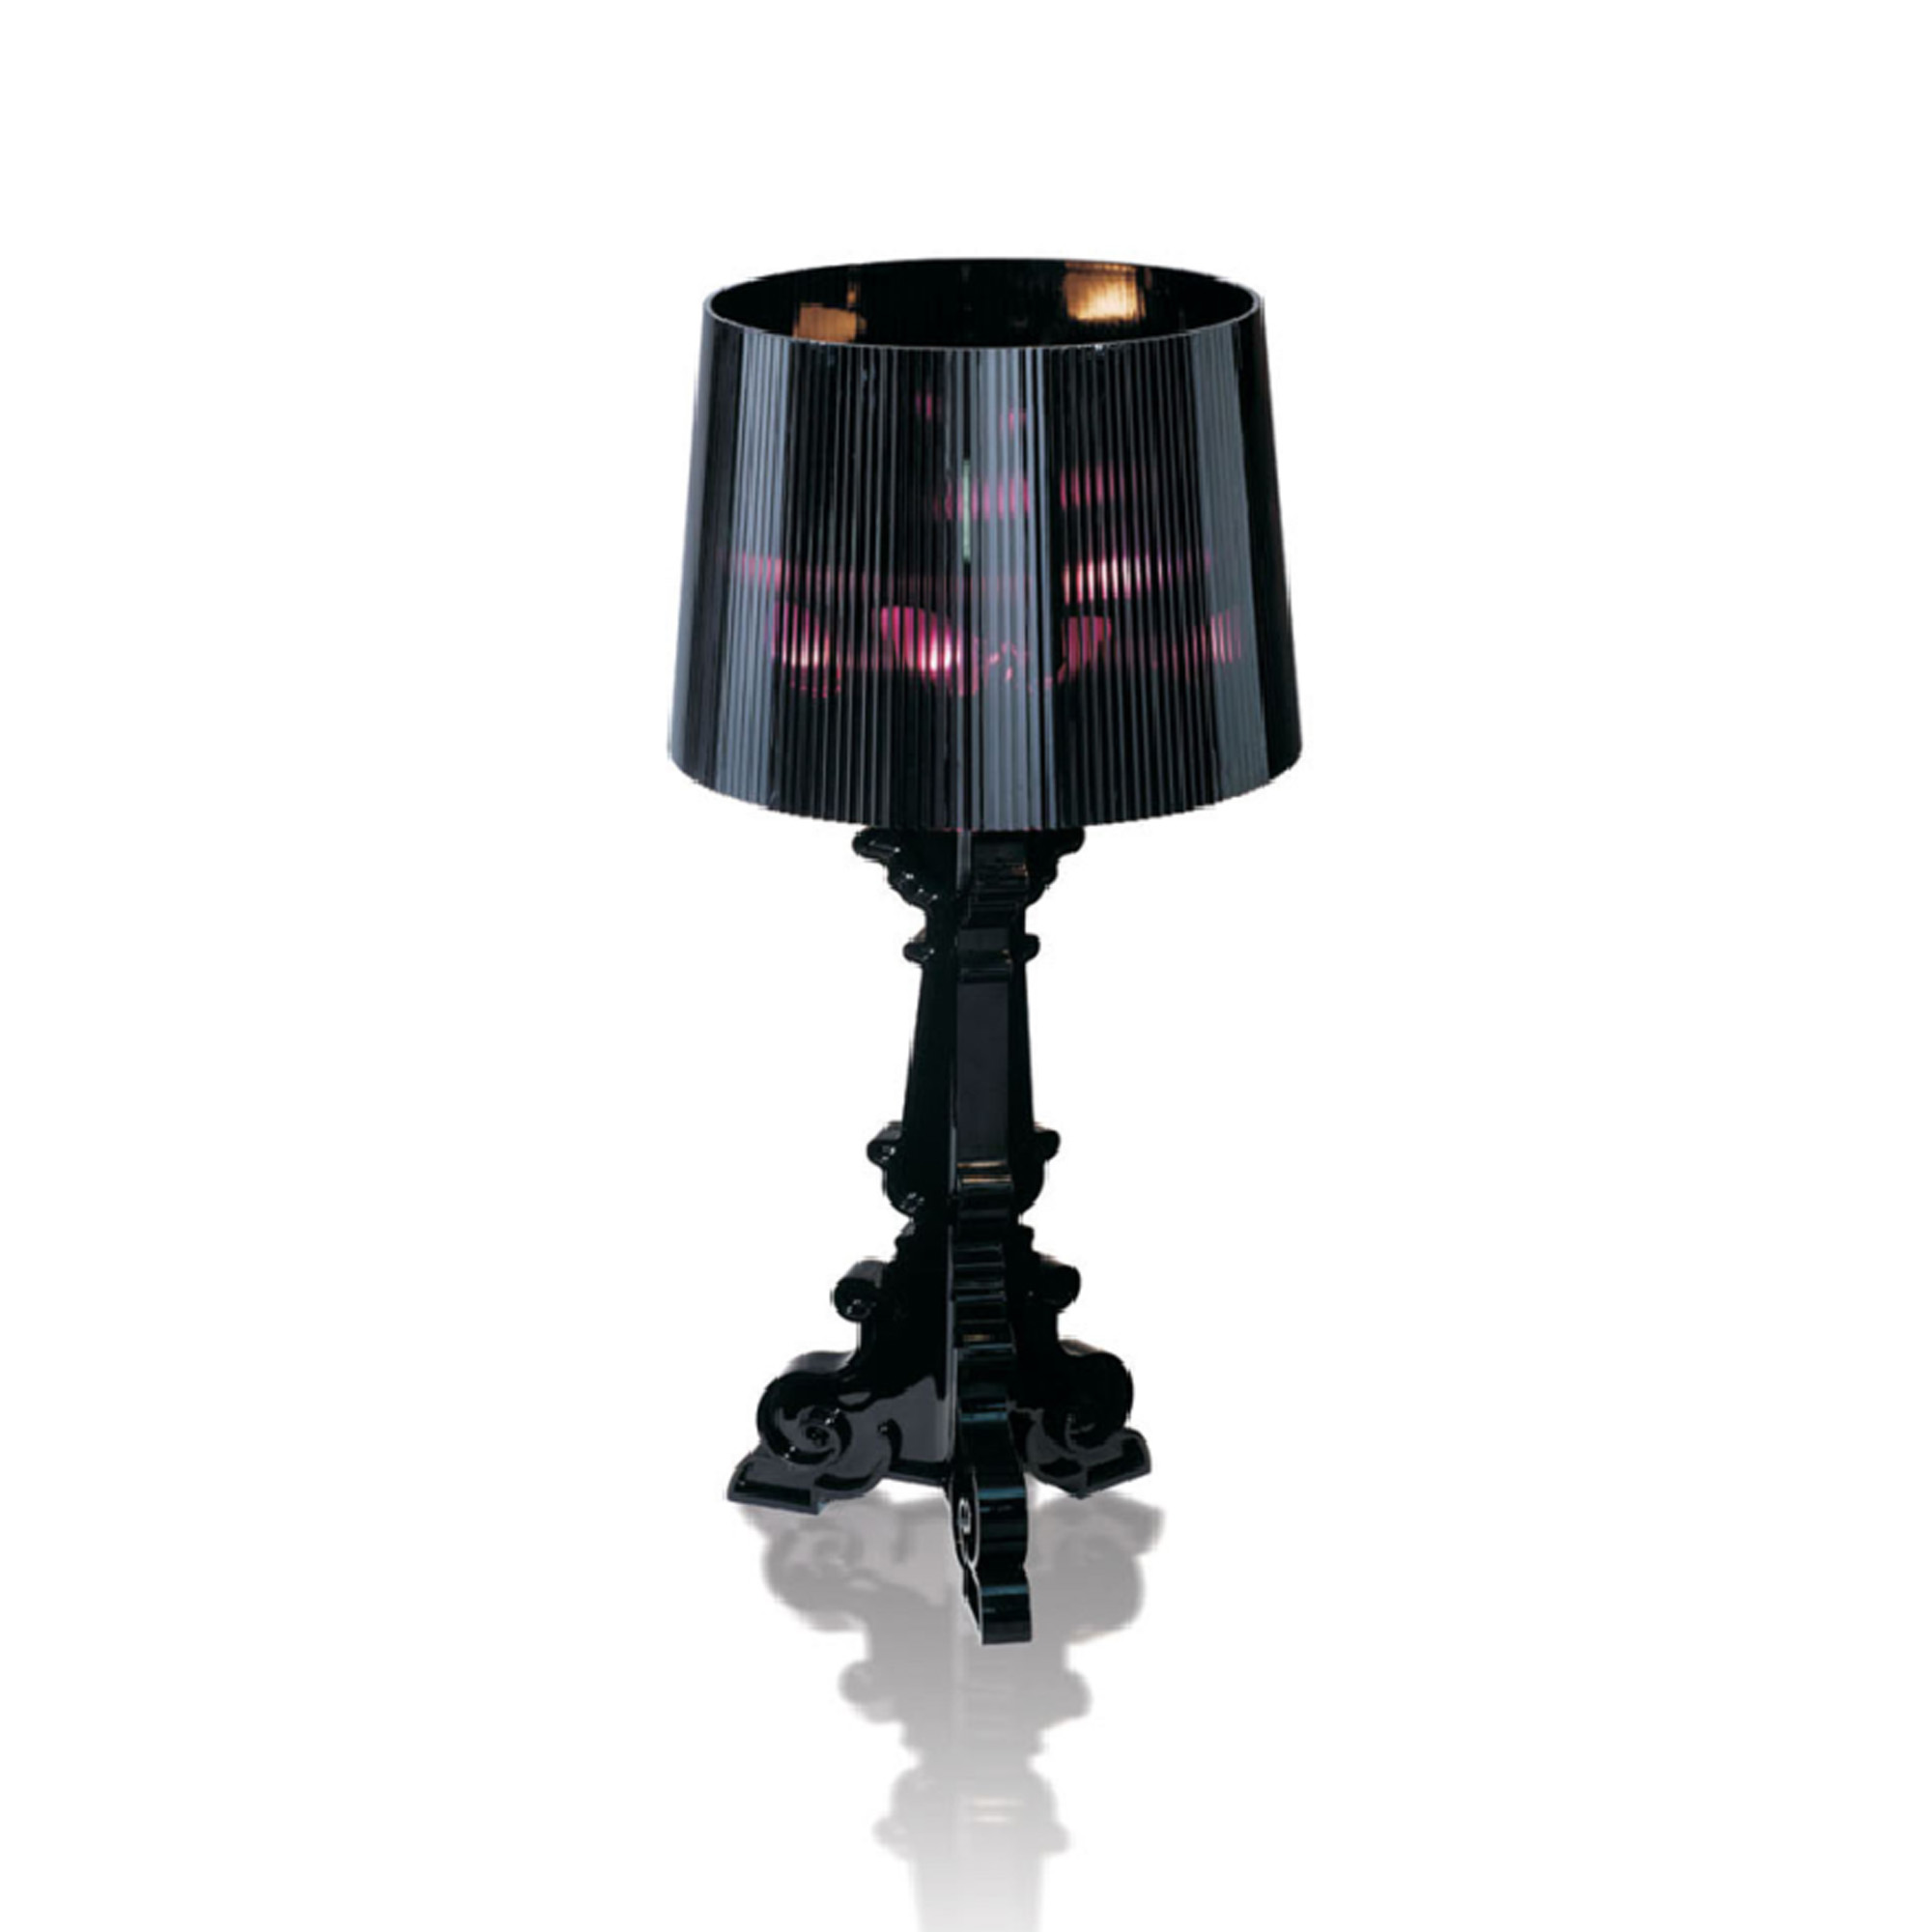 Decorative table lighting DT054-BK-1.Item No.DT054-BK         2.Decorative table lighting DT054-BK                3.suitable to hotel,residential and so on                 4.Modern style                 5.This beautiful lamp is made of the highest quality materials